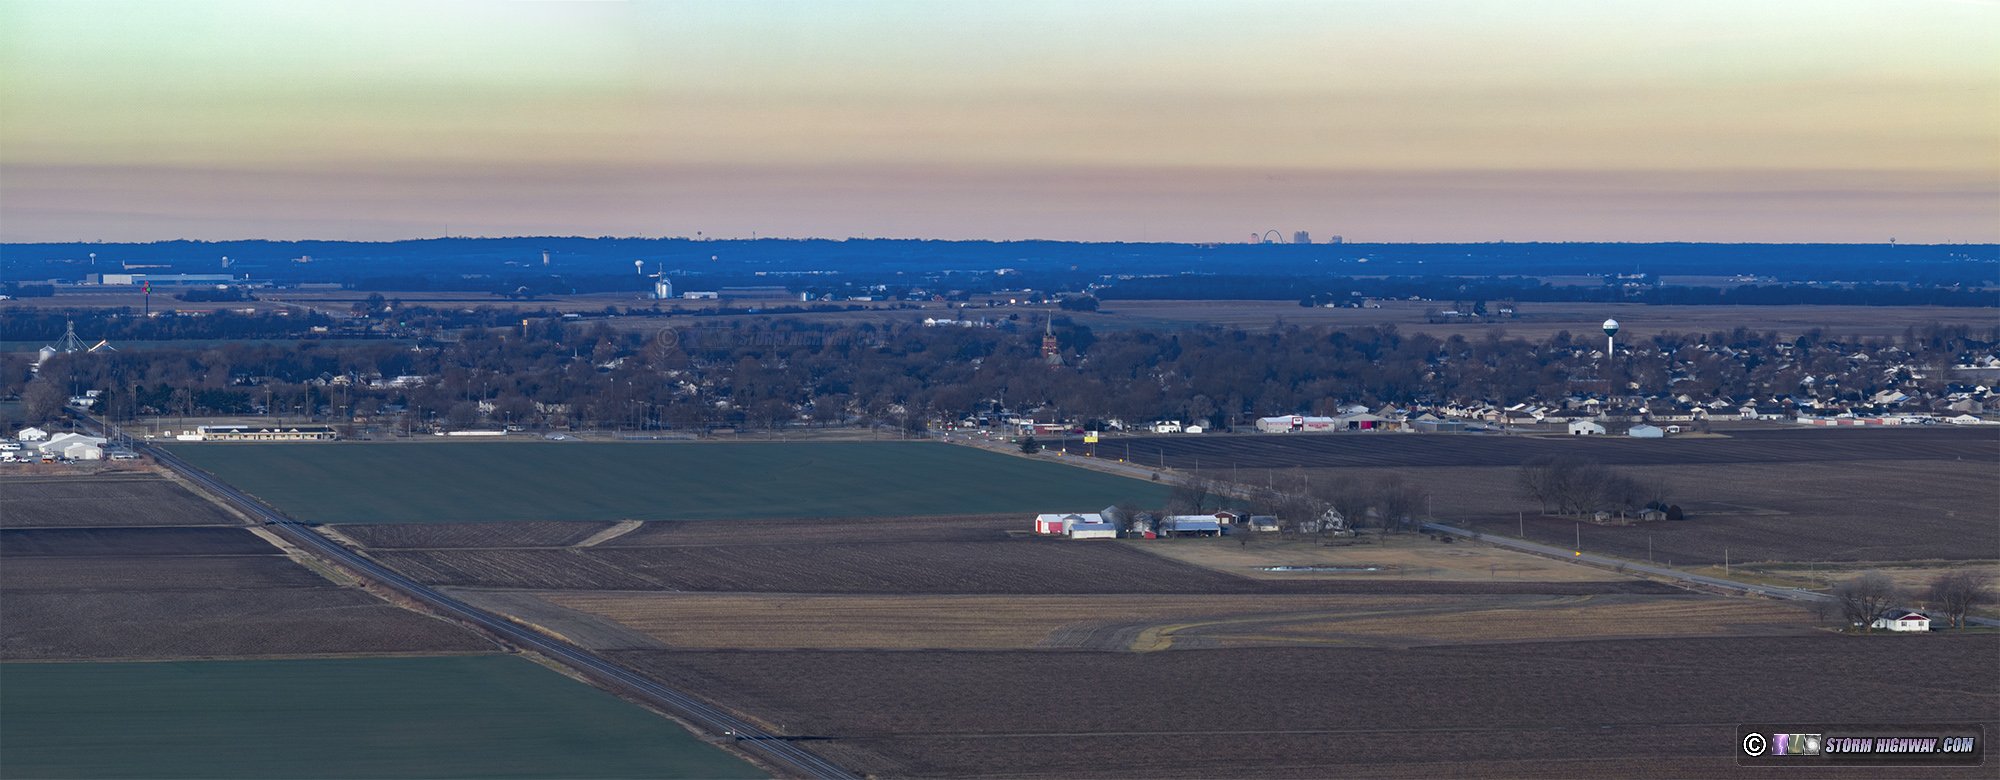 St. Louis' Gateway Arch over New Baden, Illinois